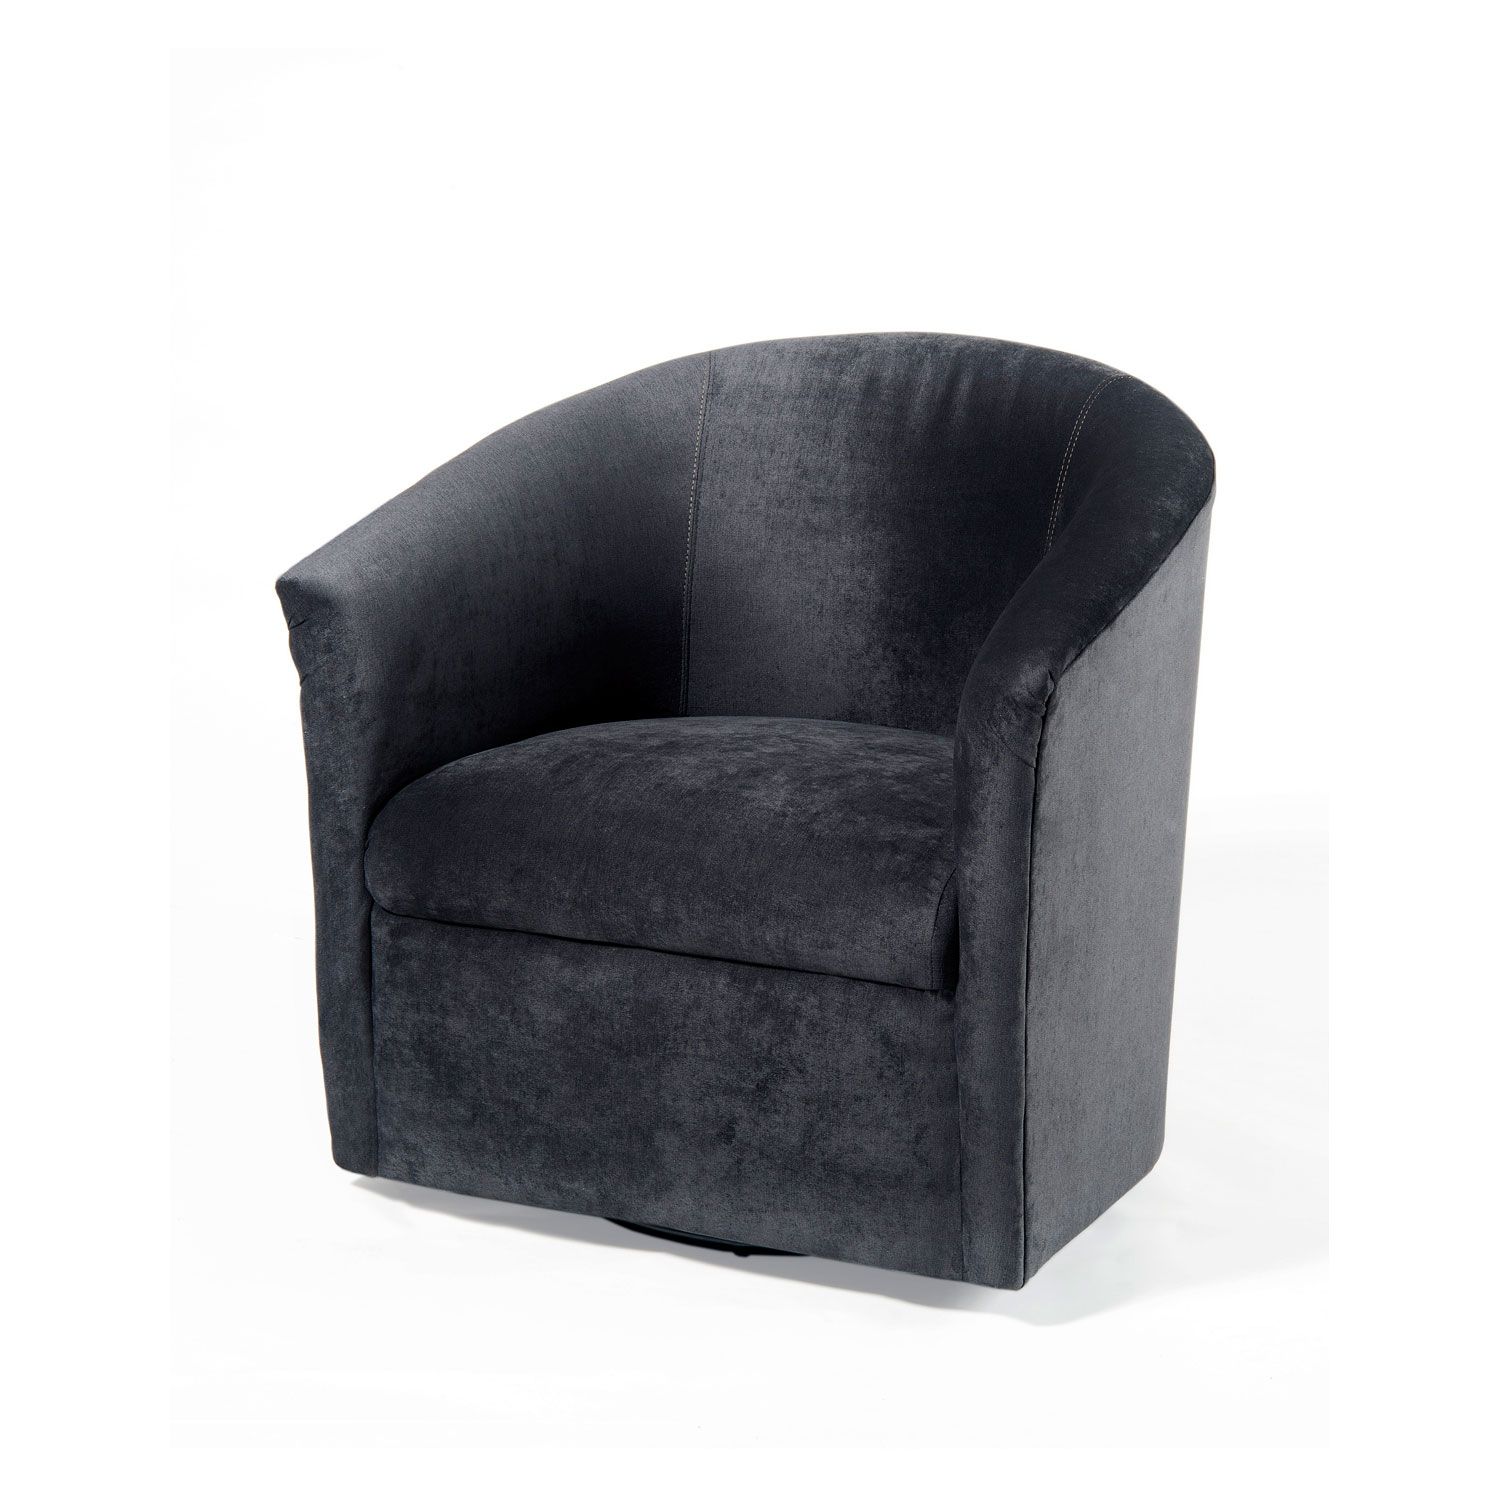 Comfort Pointe Elizabeth Charcoal Swivel Chair 2001 02 | Bellacor Within Charcoal Swivel Chairs (View 3 of 20)